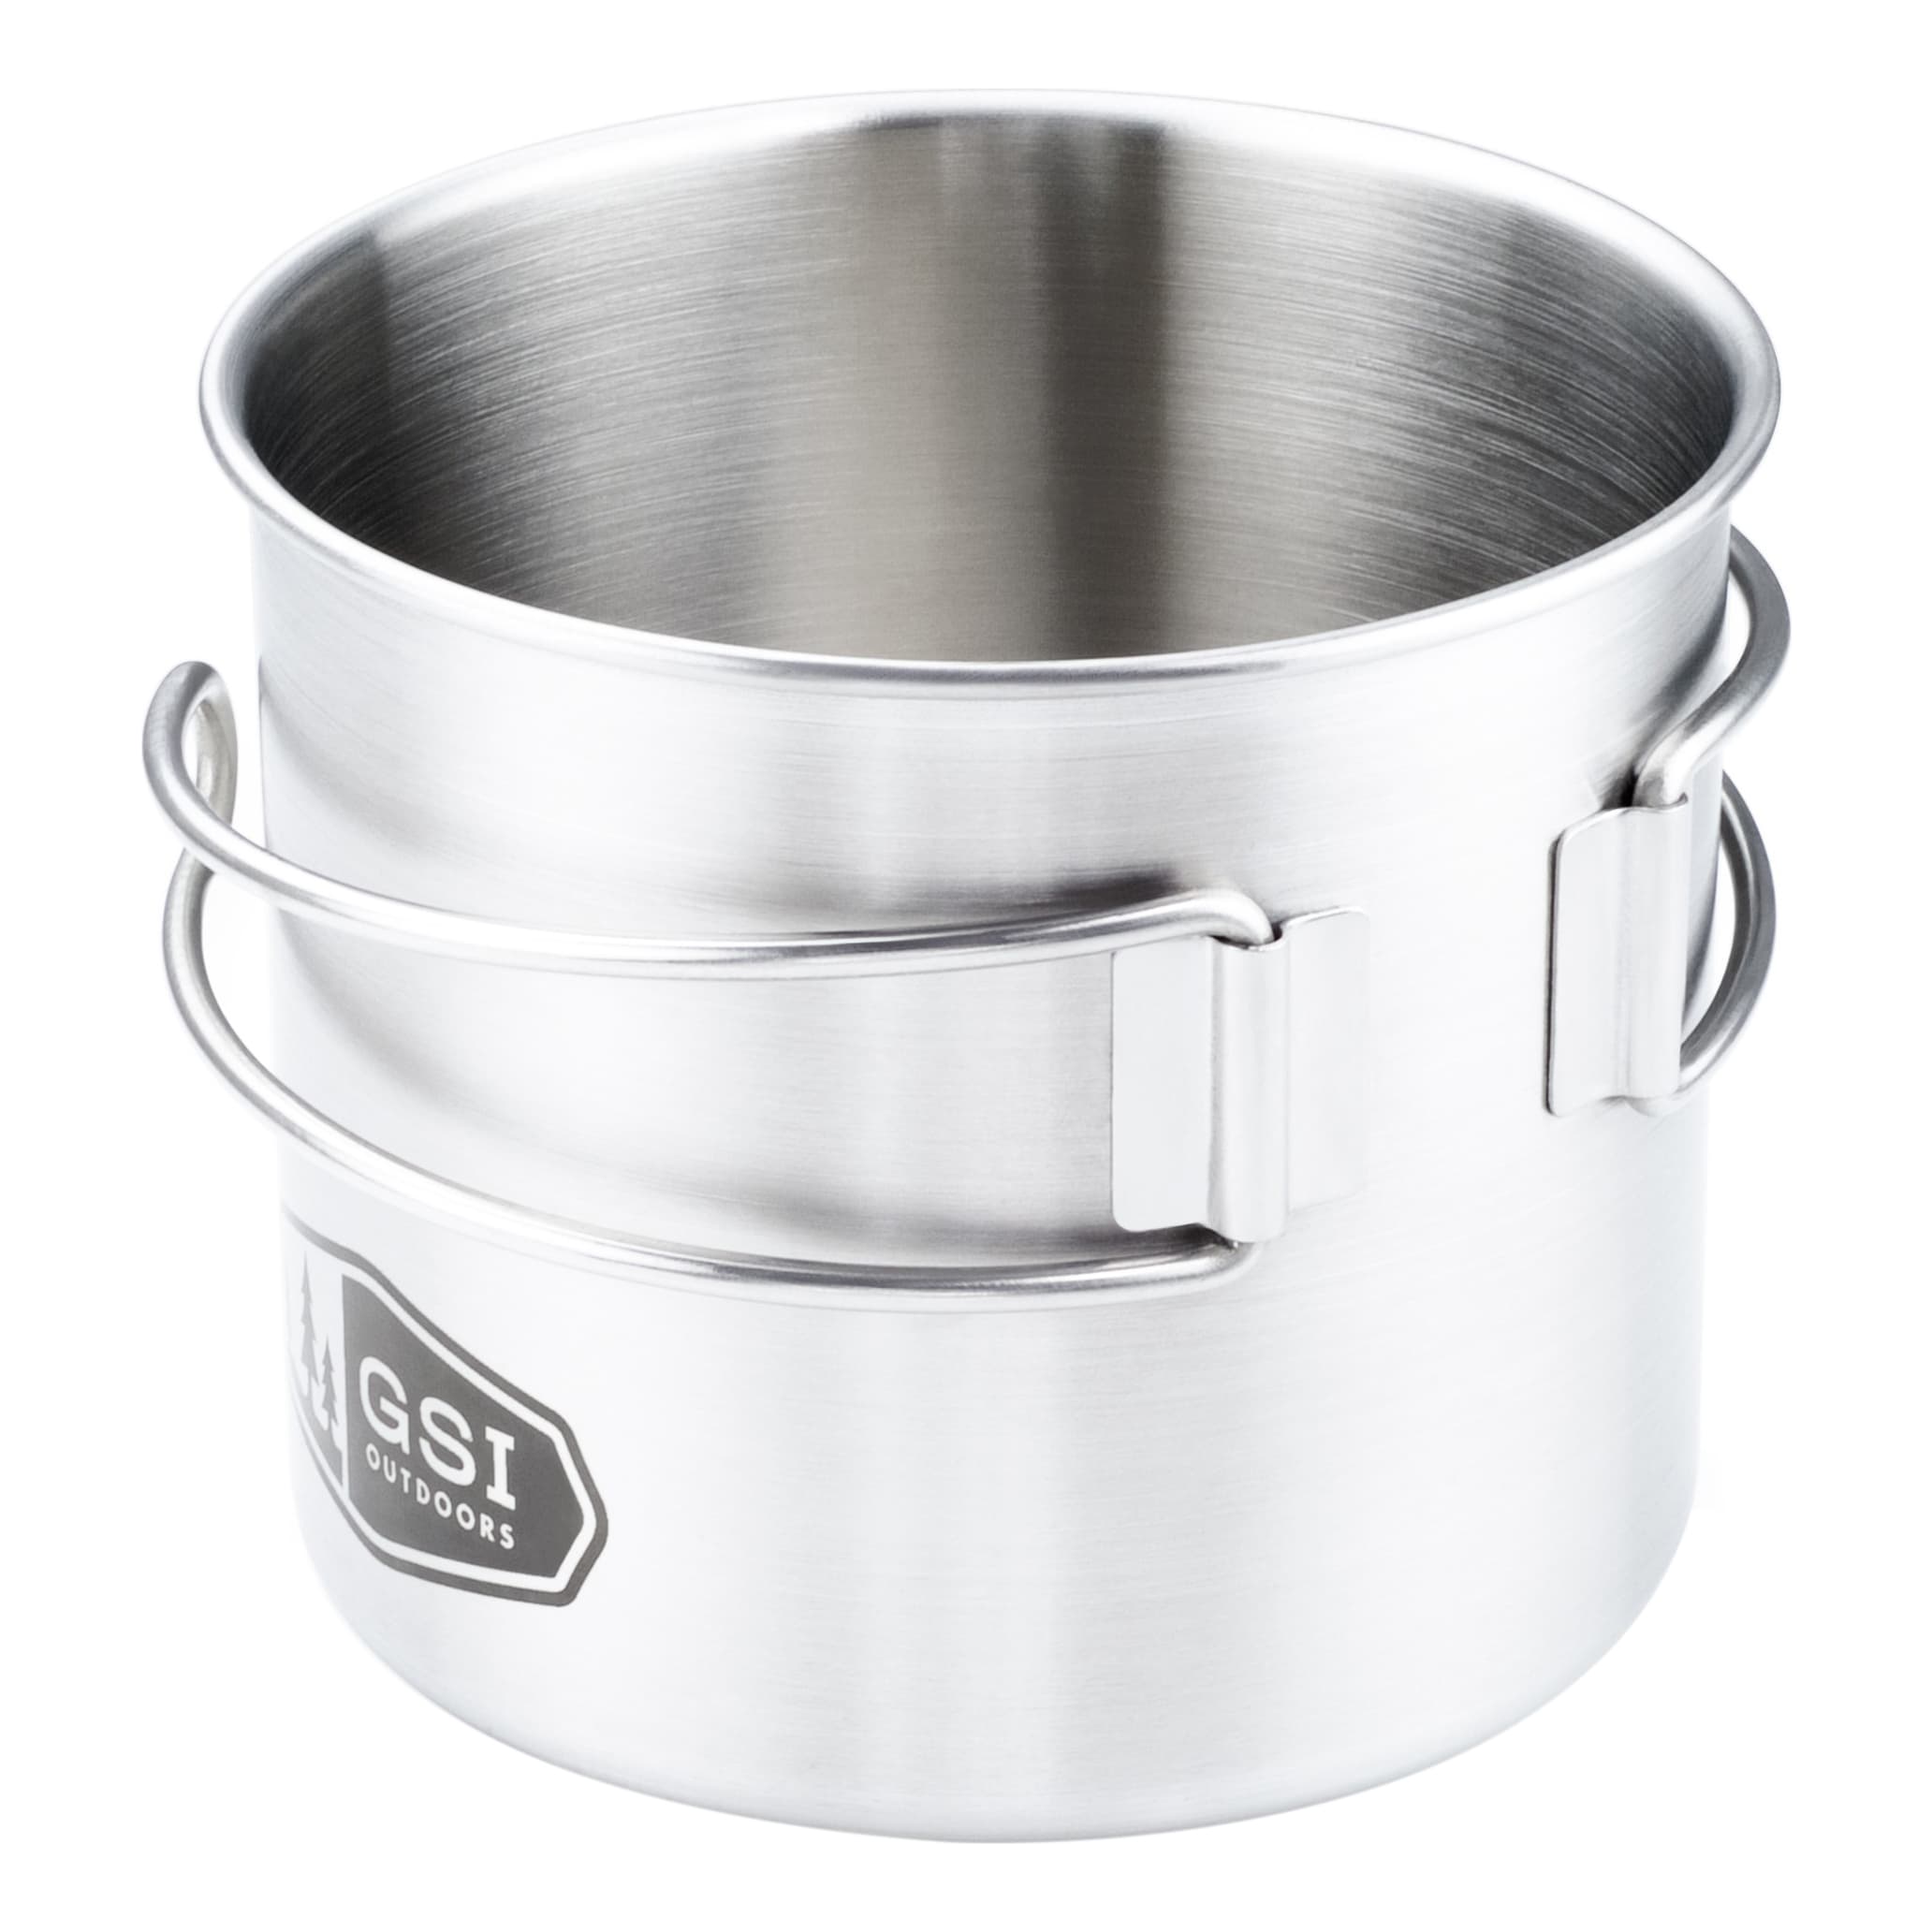 GSI Outdoors Stainless Steel Bottle Cup/Pot - Handles Folded In